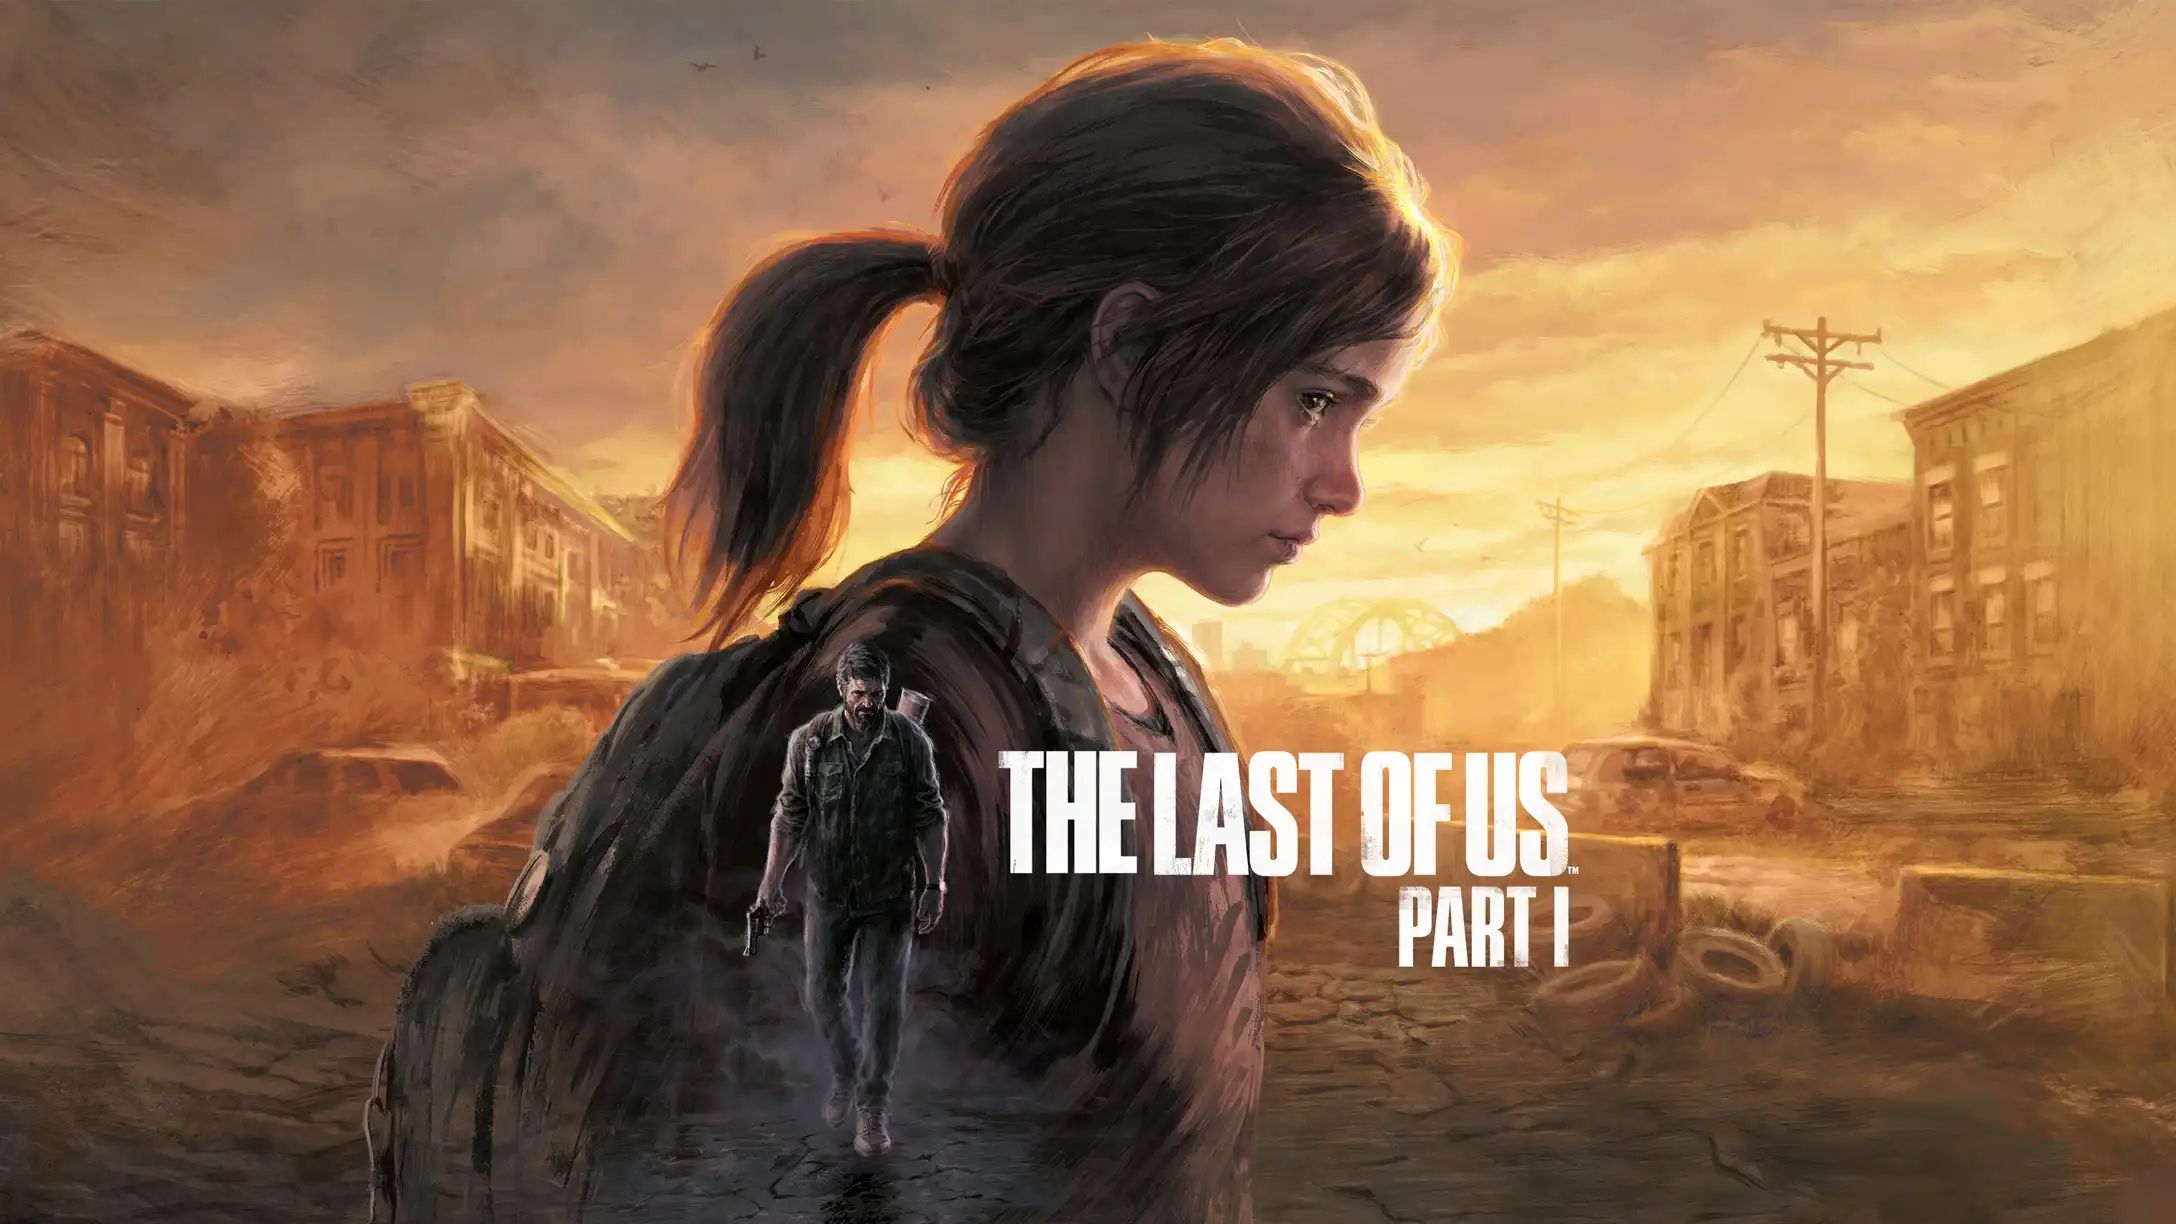 Image for The Last of Us Part 1 coming to PS5 in September, in development for PC [UPDATE]